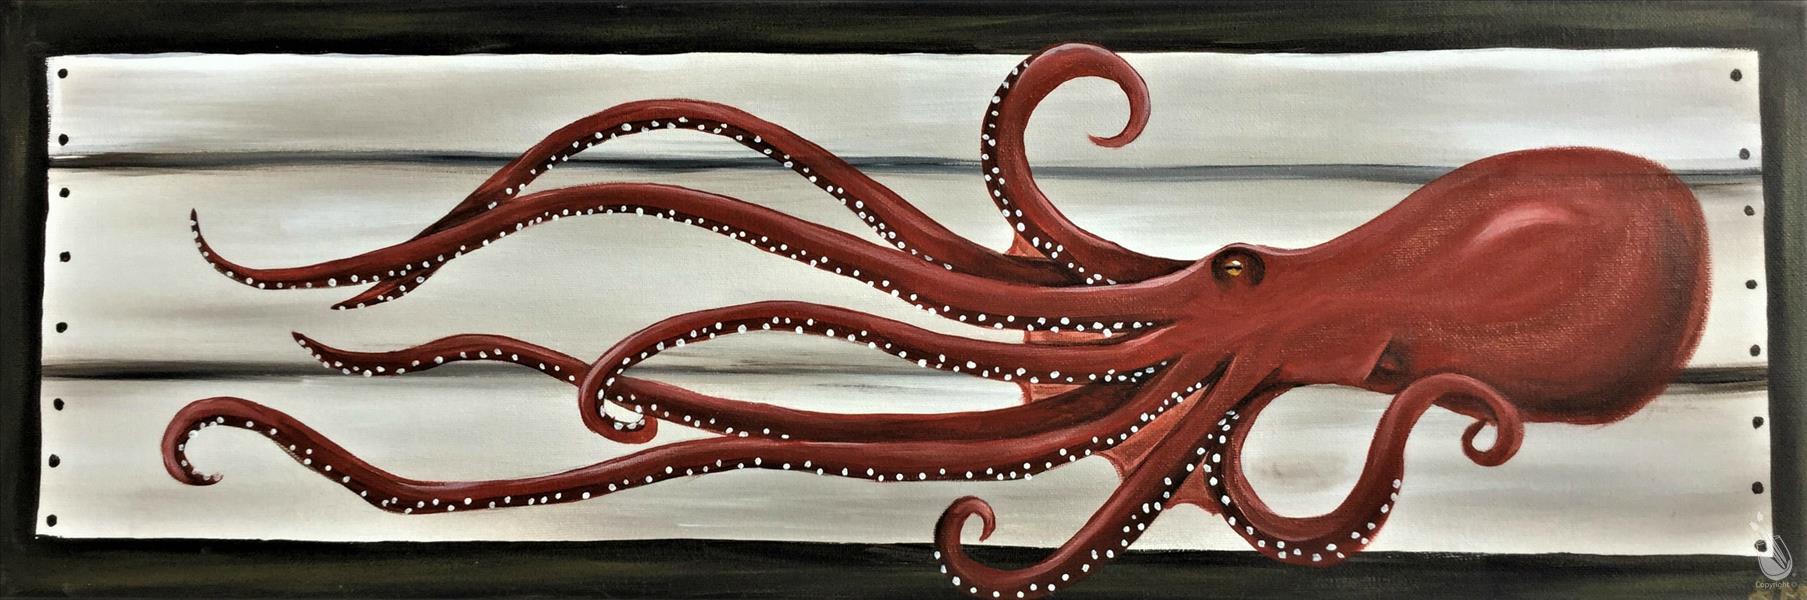 Nautical Octopus!  ADD A CANDLE!!